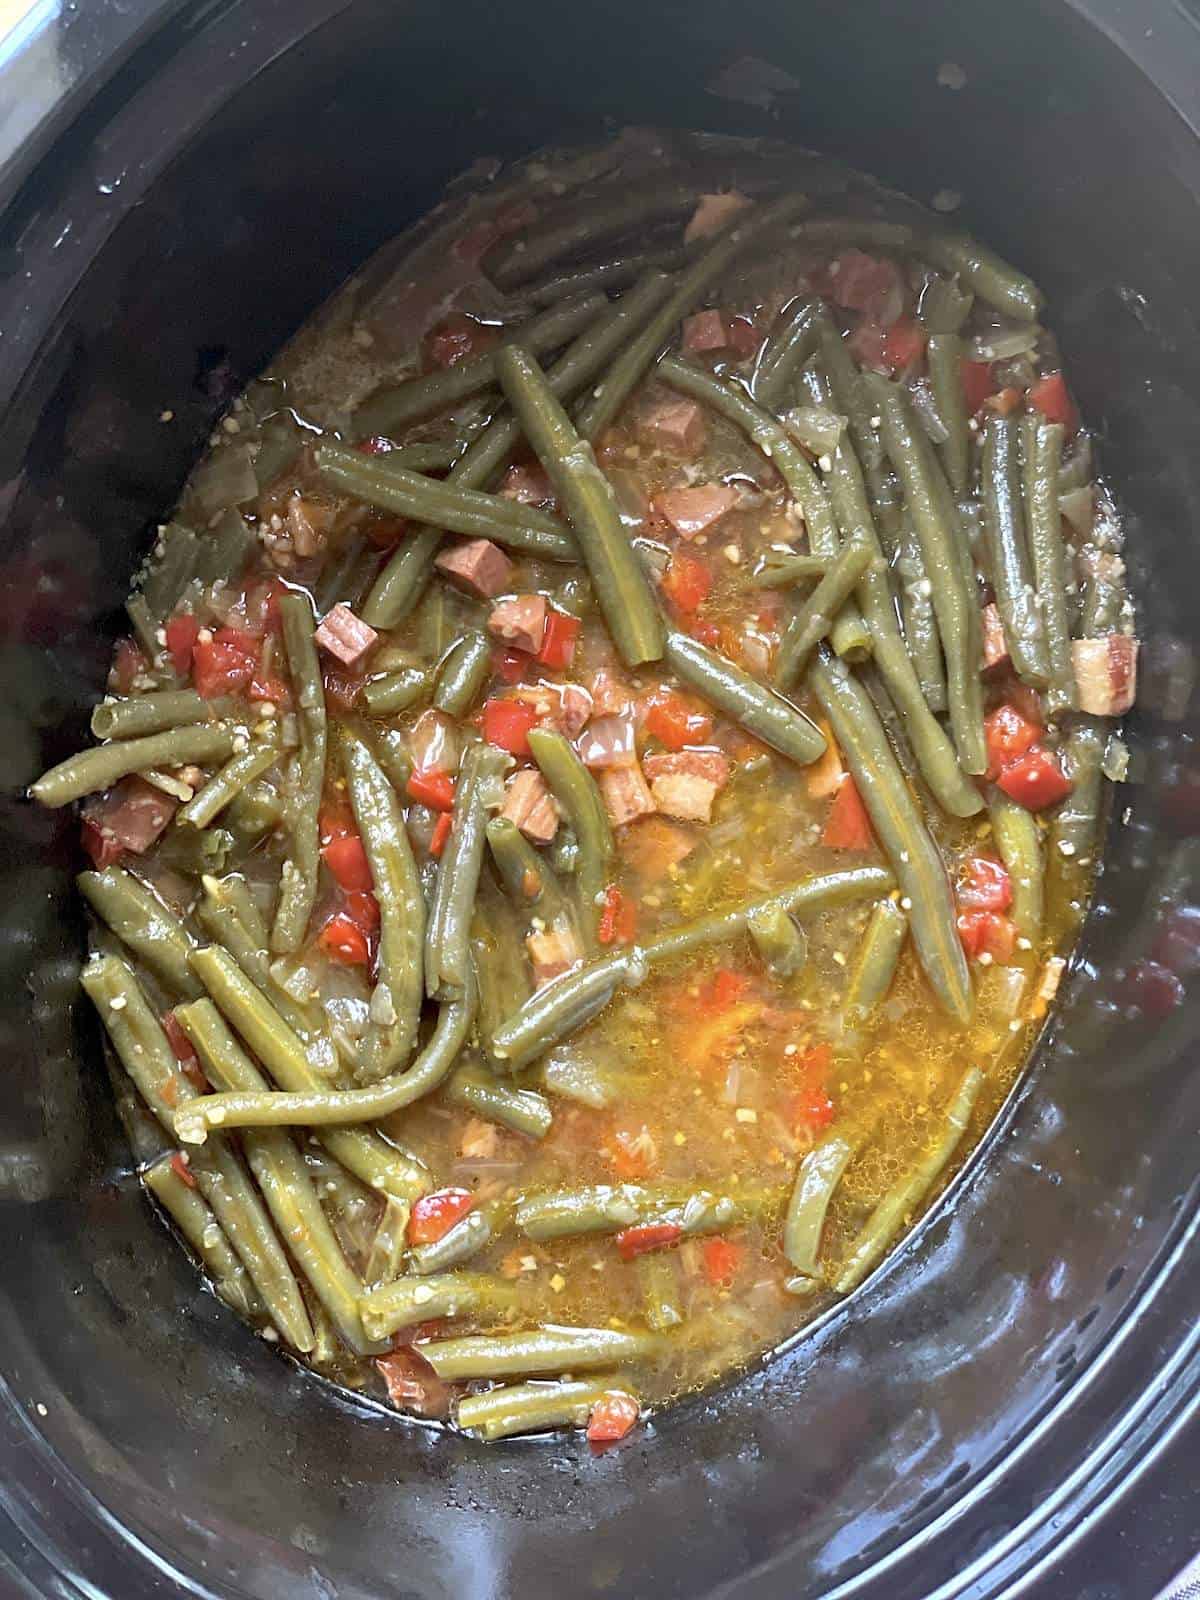 Green beans in a crock pot that have cooked down with bacon and ham.